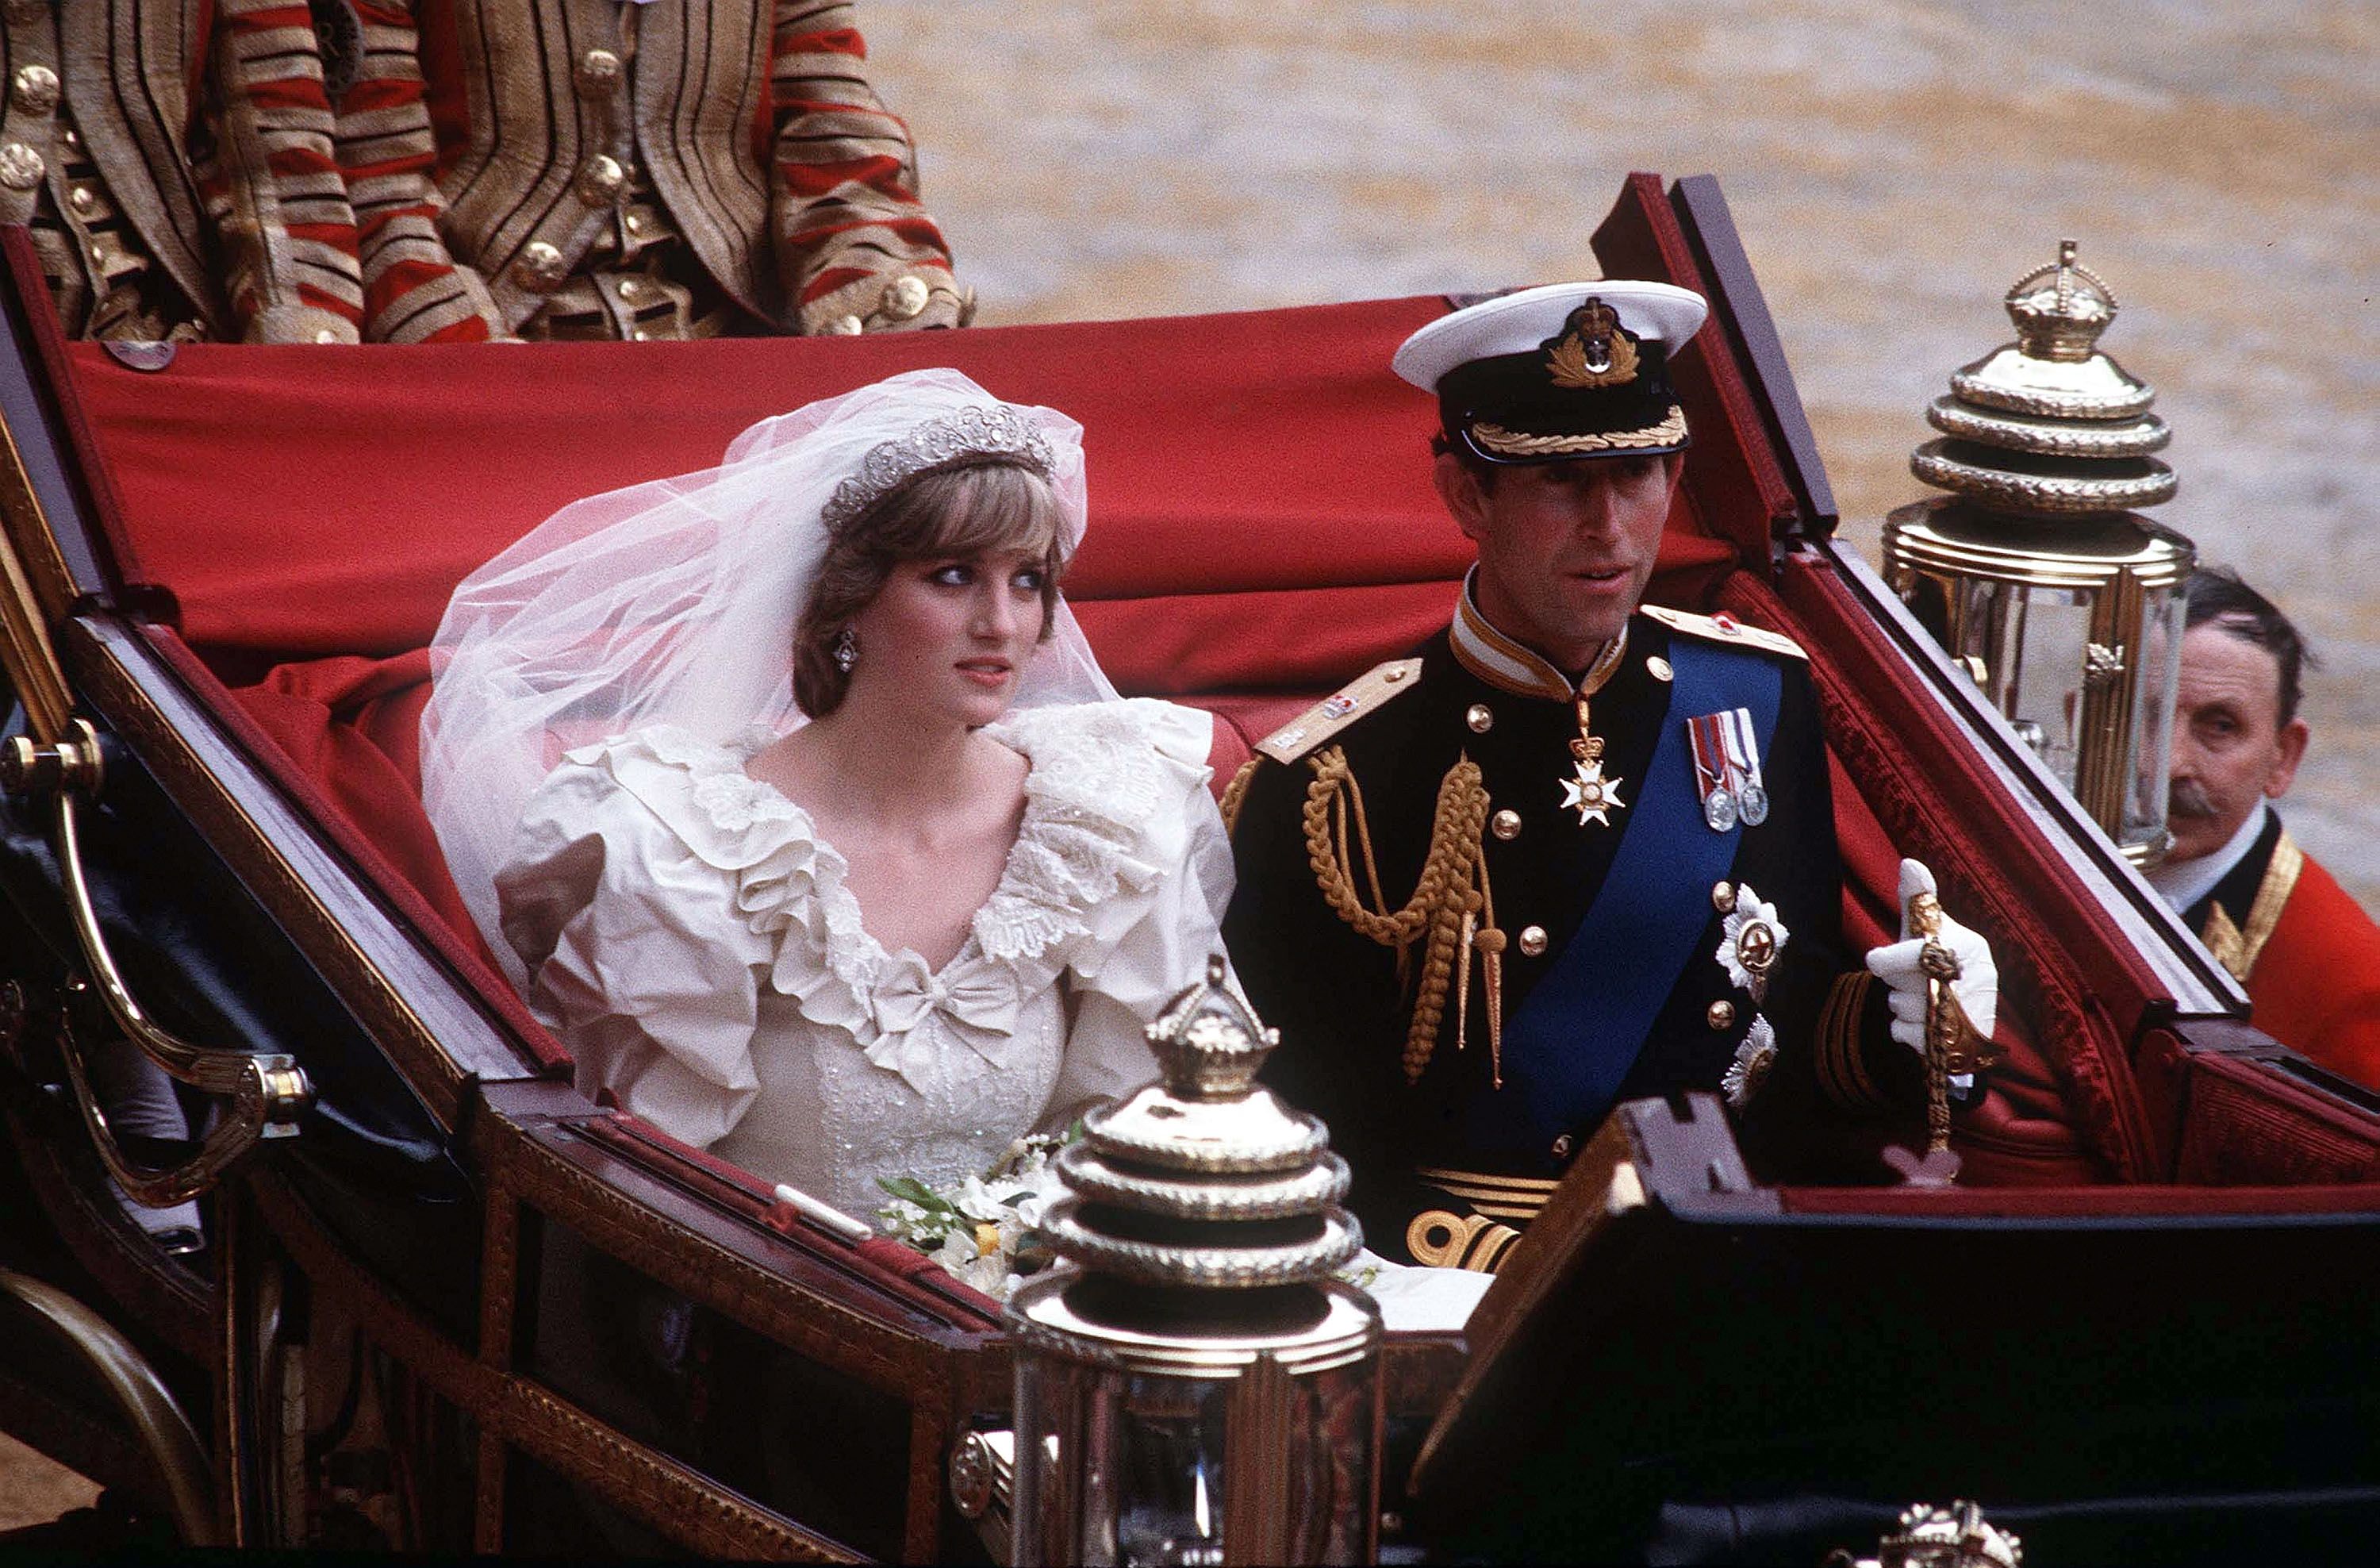 Princess Diana Wore Special Low-Heeled Shoes on Her Wedding Day to Avoid Being Taller than Prince Charles